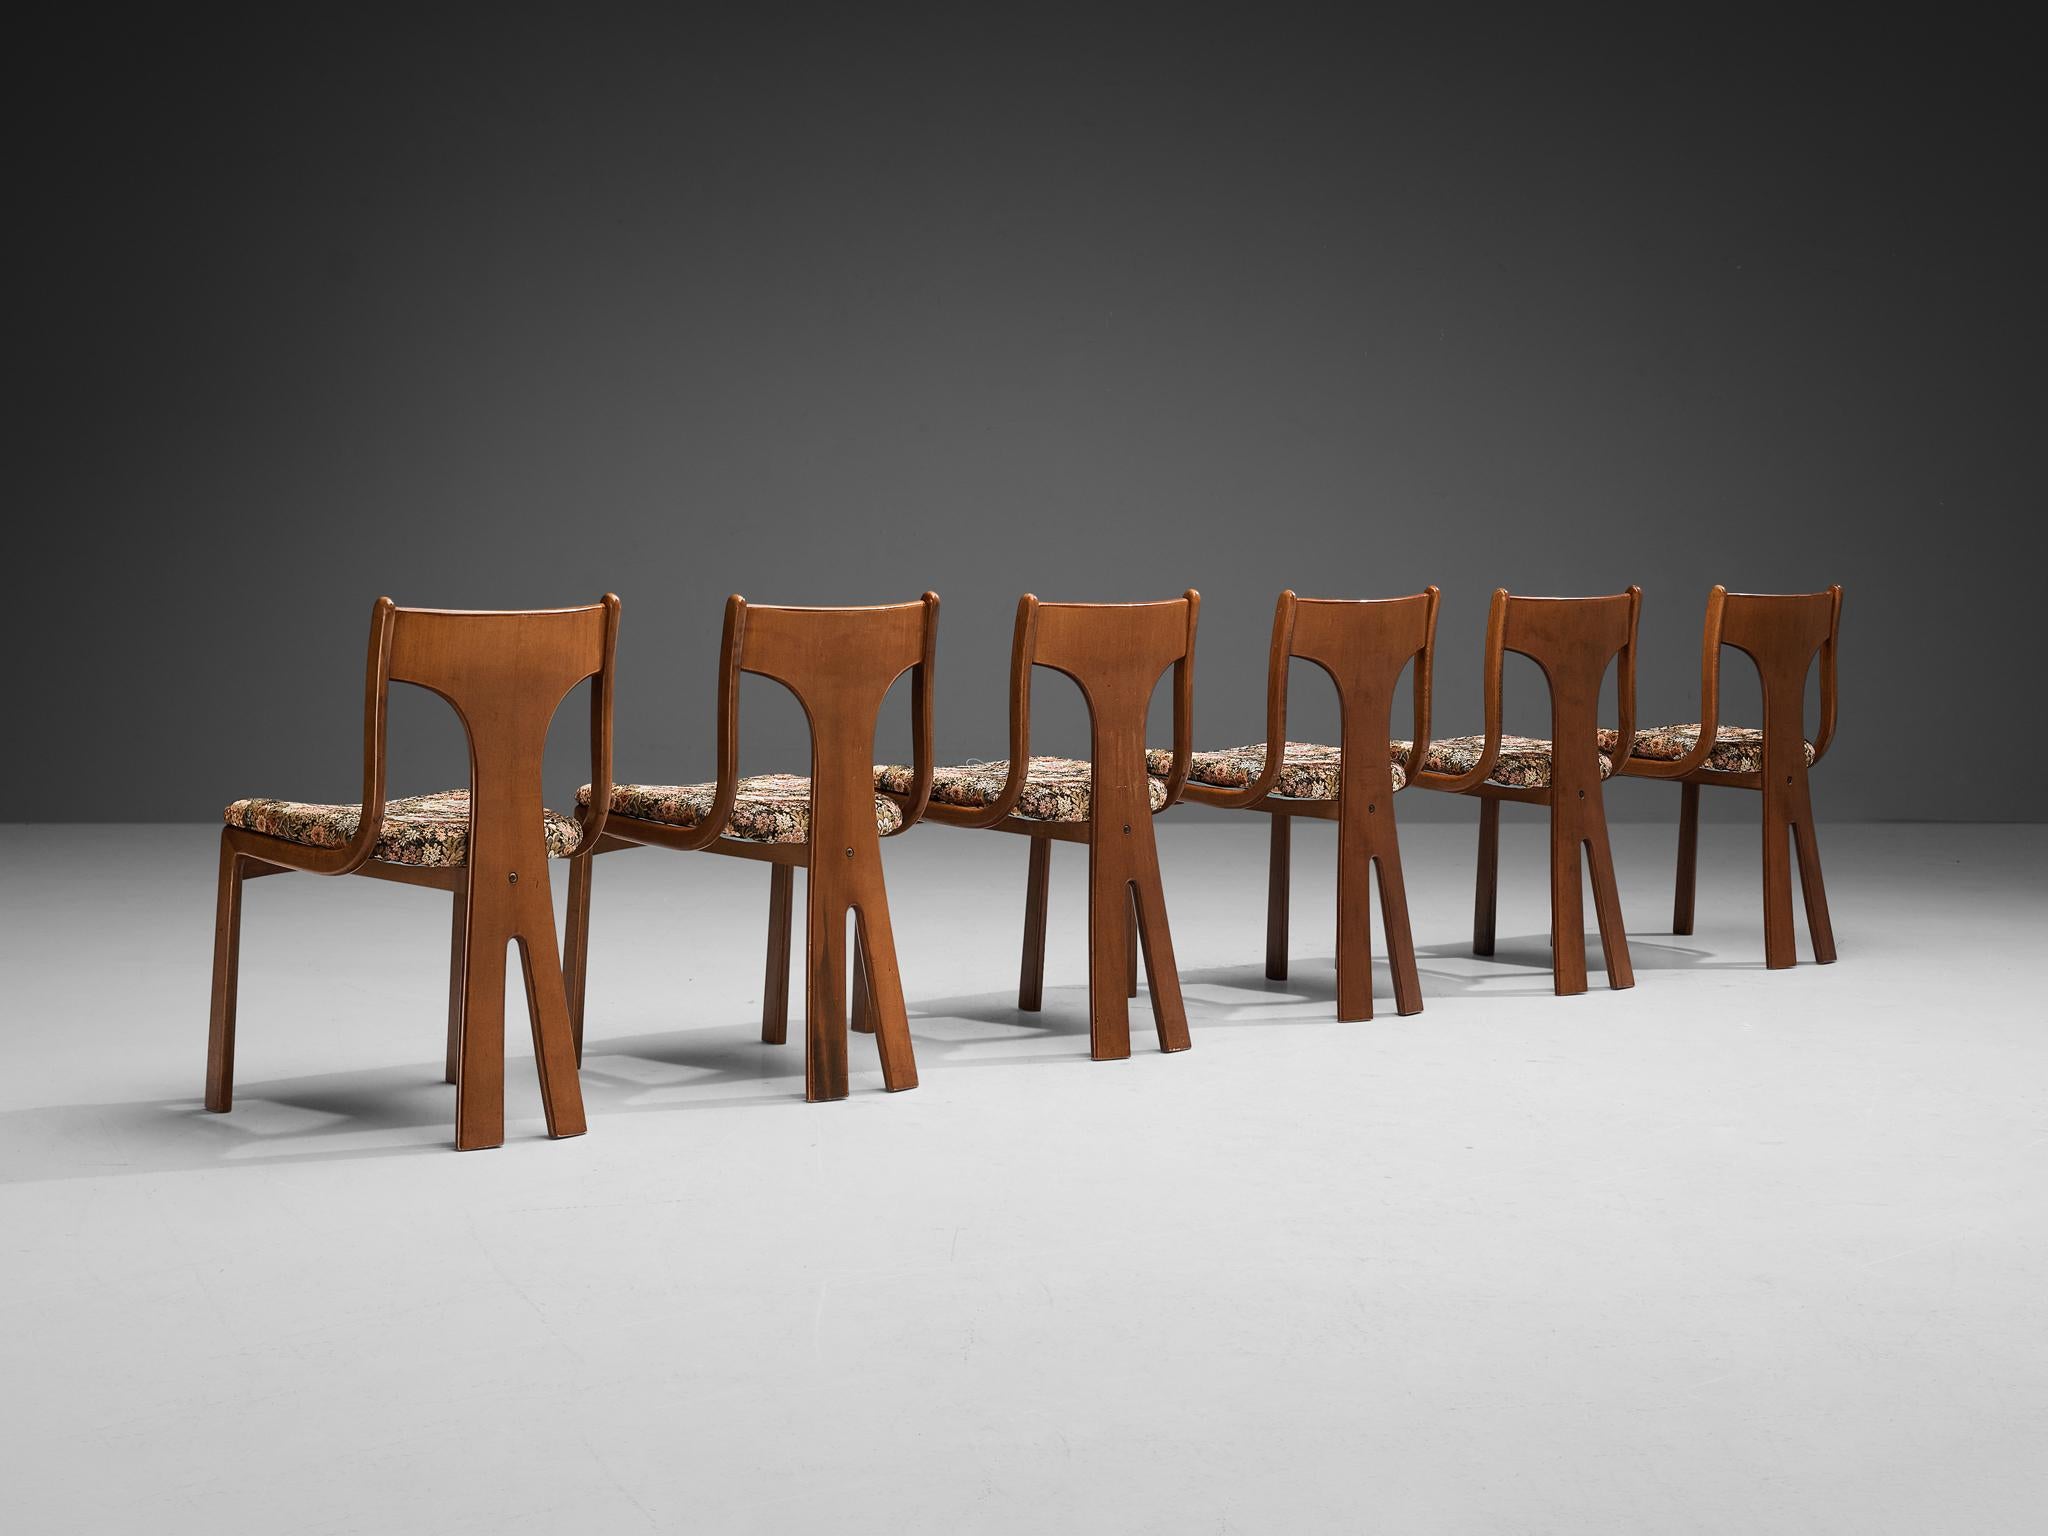 Set of six dining chairs, beech, fabric, Italy, 1960s

Set of six Italian mid-century modern dining chairs in a refreshing design. The back of these chairs has a very interesting shape, the lower part of the legs is shaped very sculpturally, while